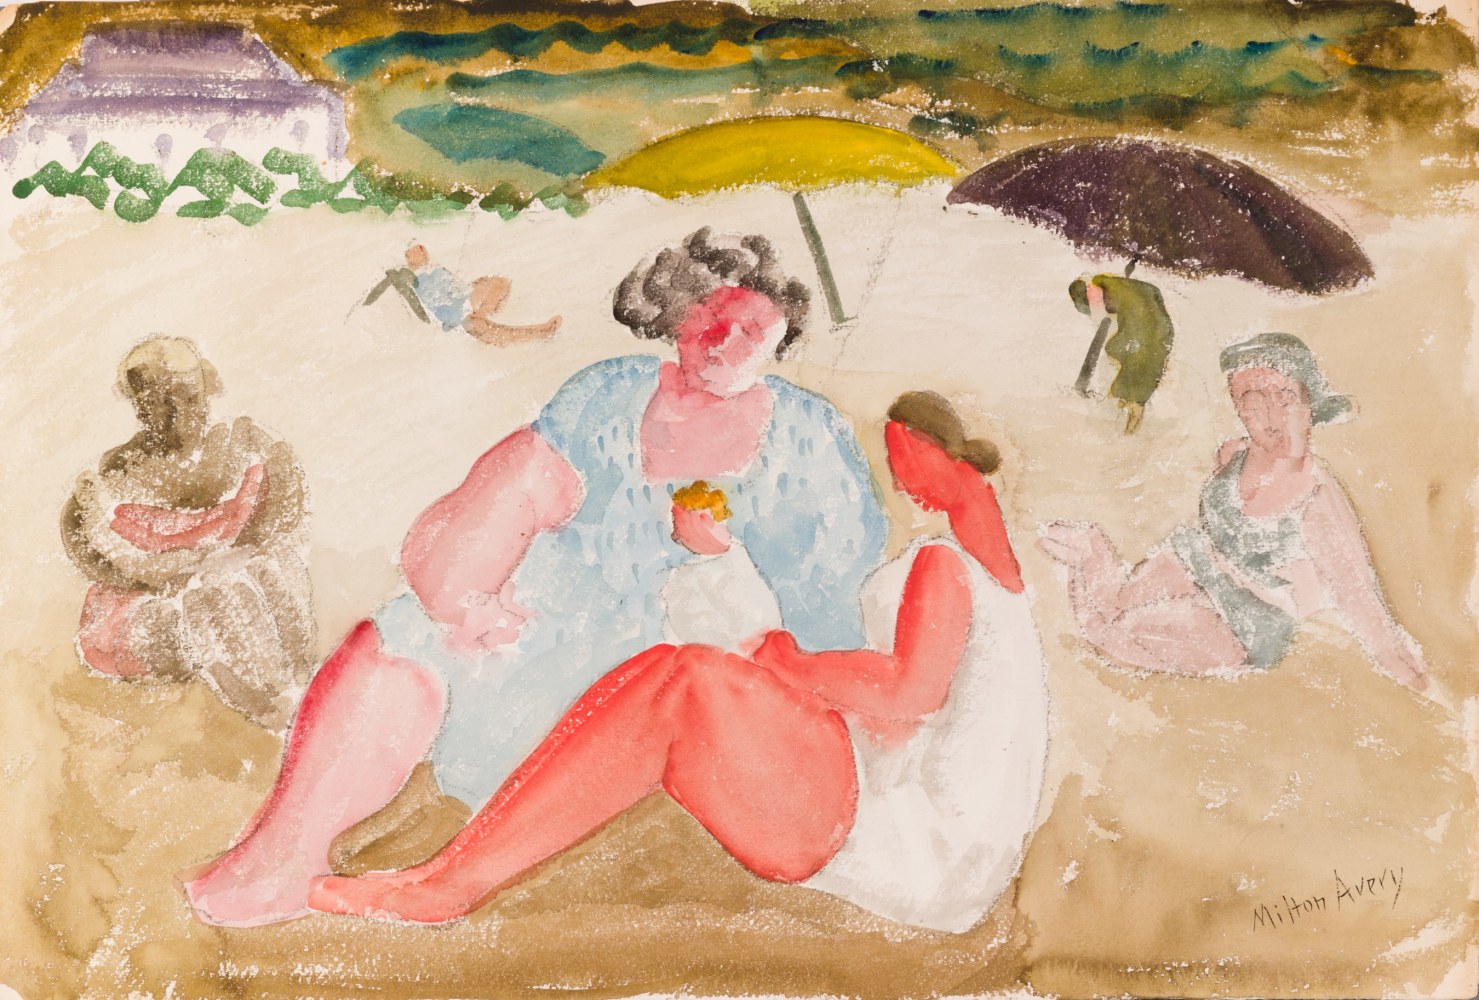 Untitled (Shore Baby)

c. 1930

Watercolor on paper

15 x 22 inches

38.1 x 55.9cm